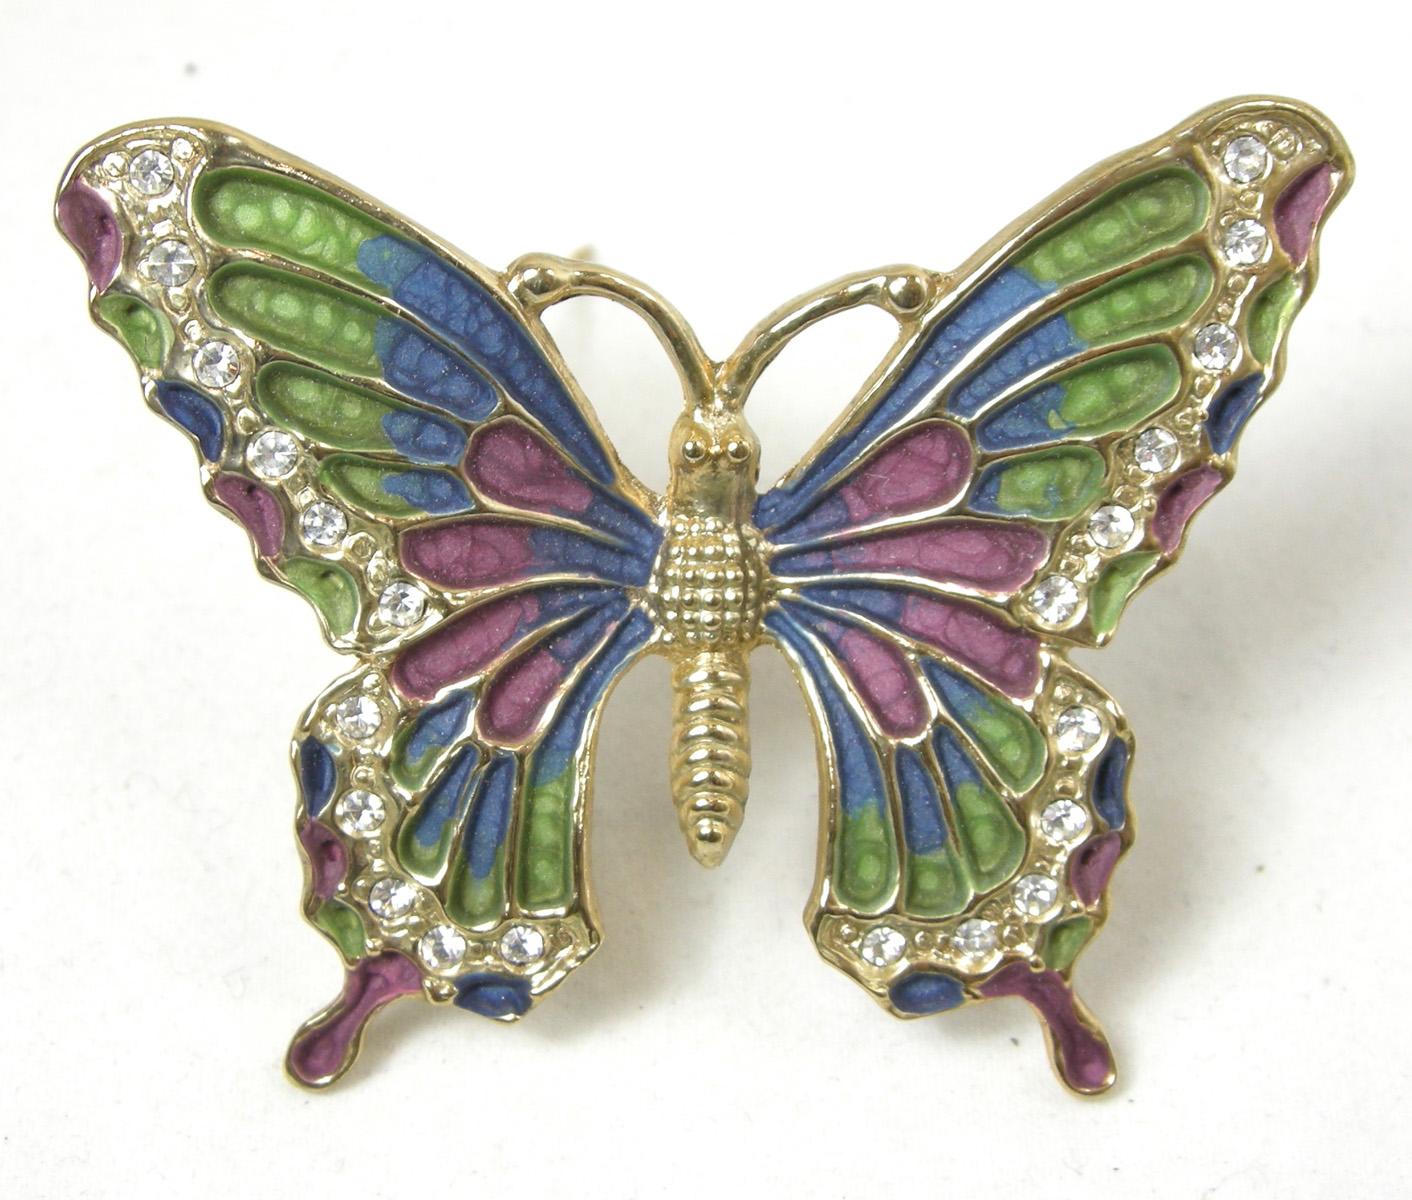 This is a beautiful butterfly pin with colorful wings of green and mauve and accented with rhinestones throughout the outer part of the wings.  It measures 2-1/4” wide x 2” long in a gold tone setting.  It is in excellent condition.